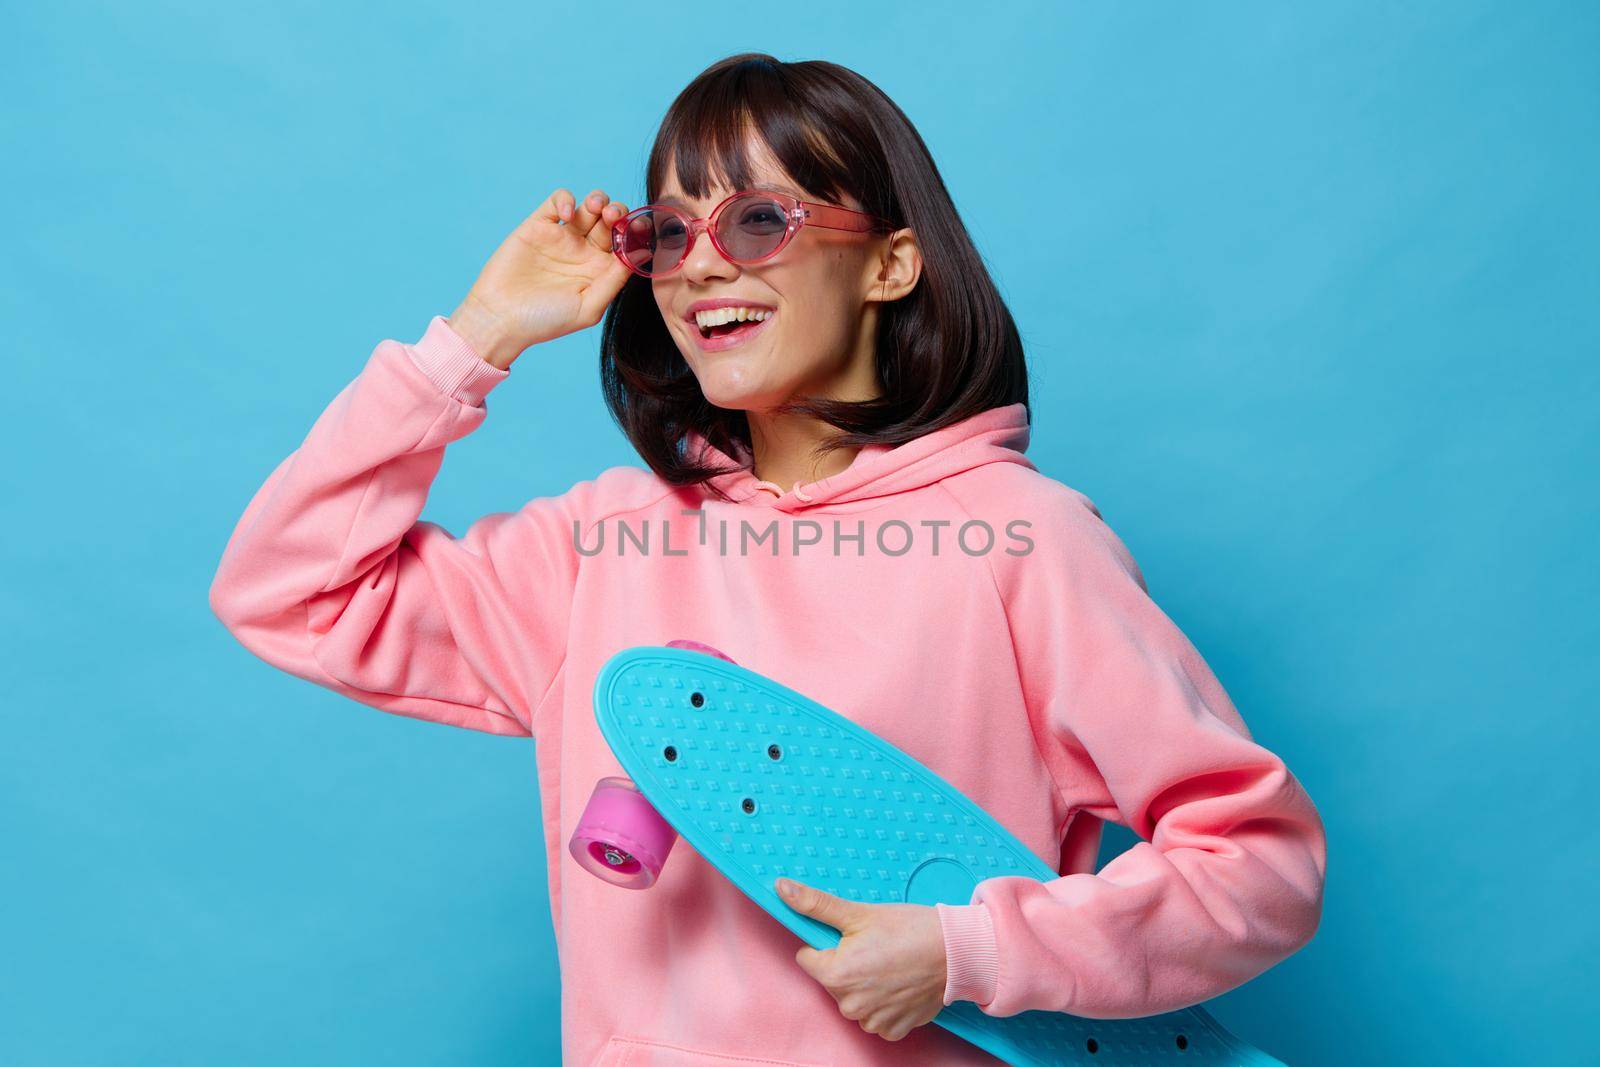 woman in a pink sweater skateboard entertainment isolated background. High quality photo